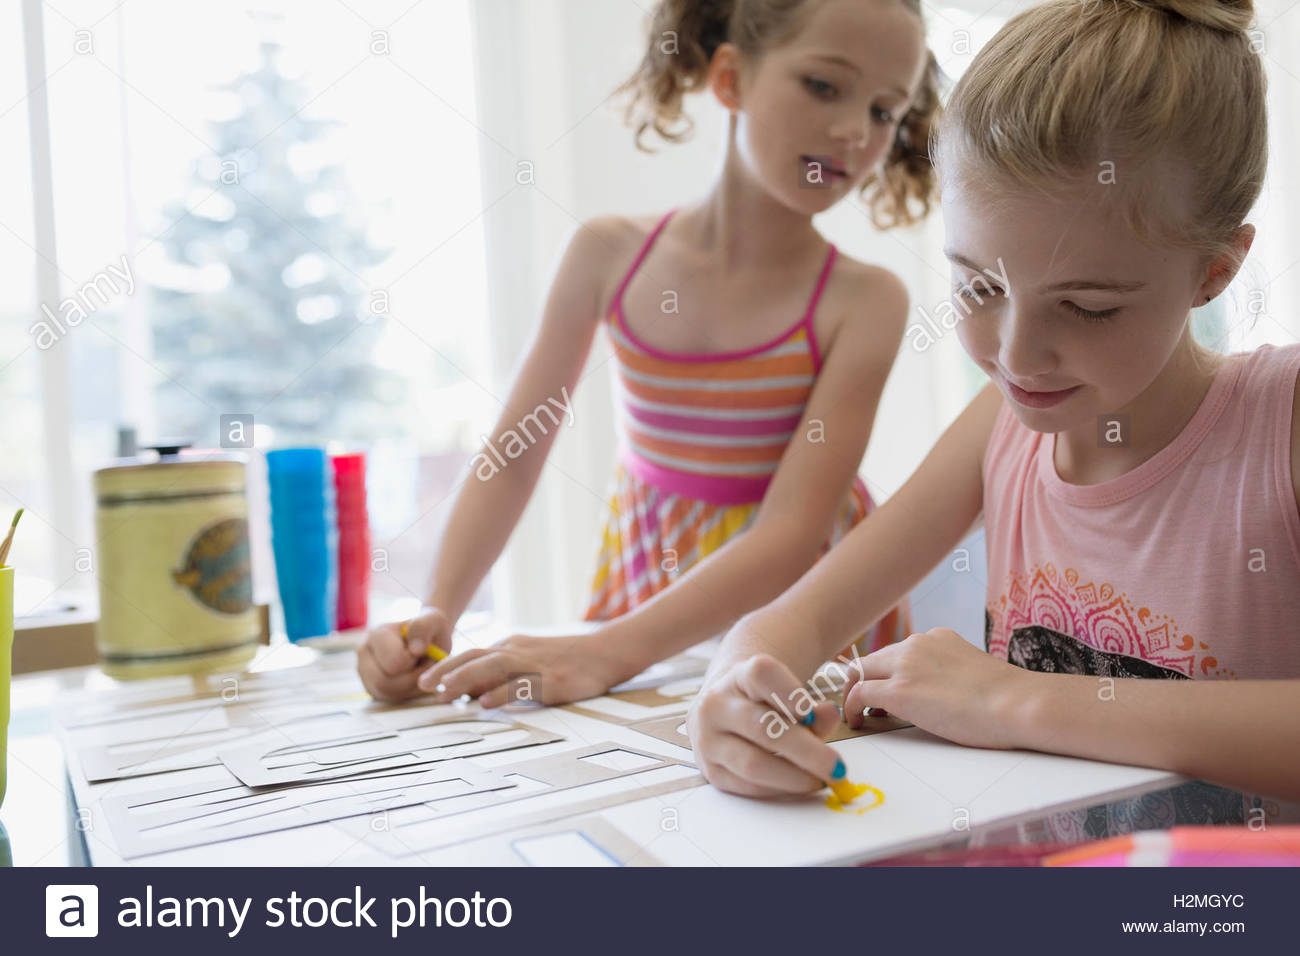 Girls coloring and using stencils at dining table Stock Photo